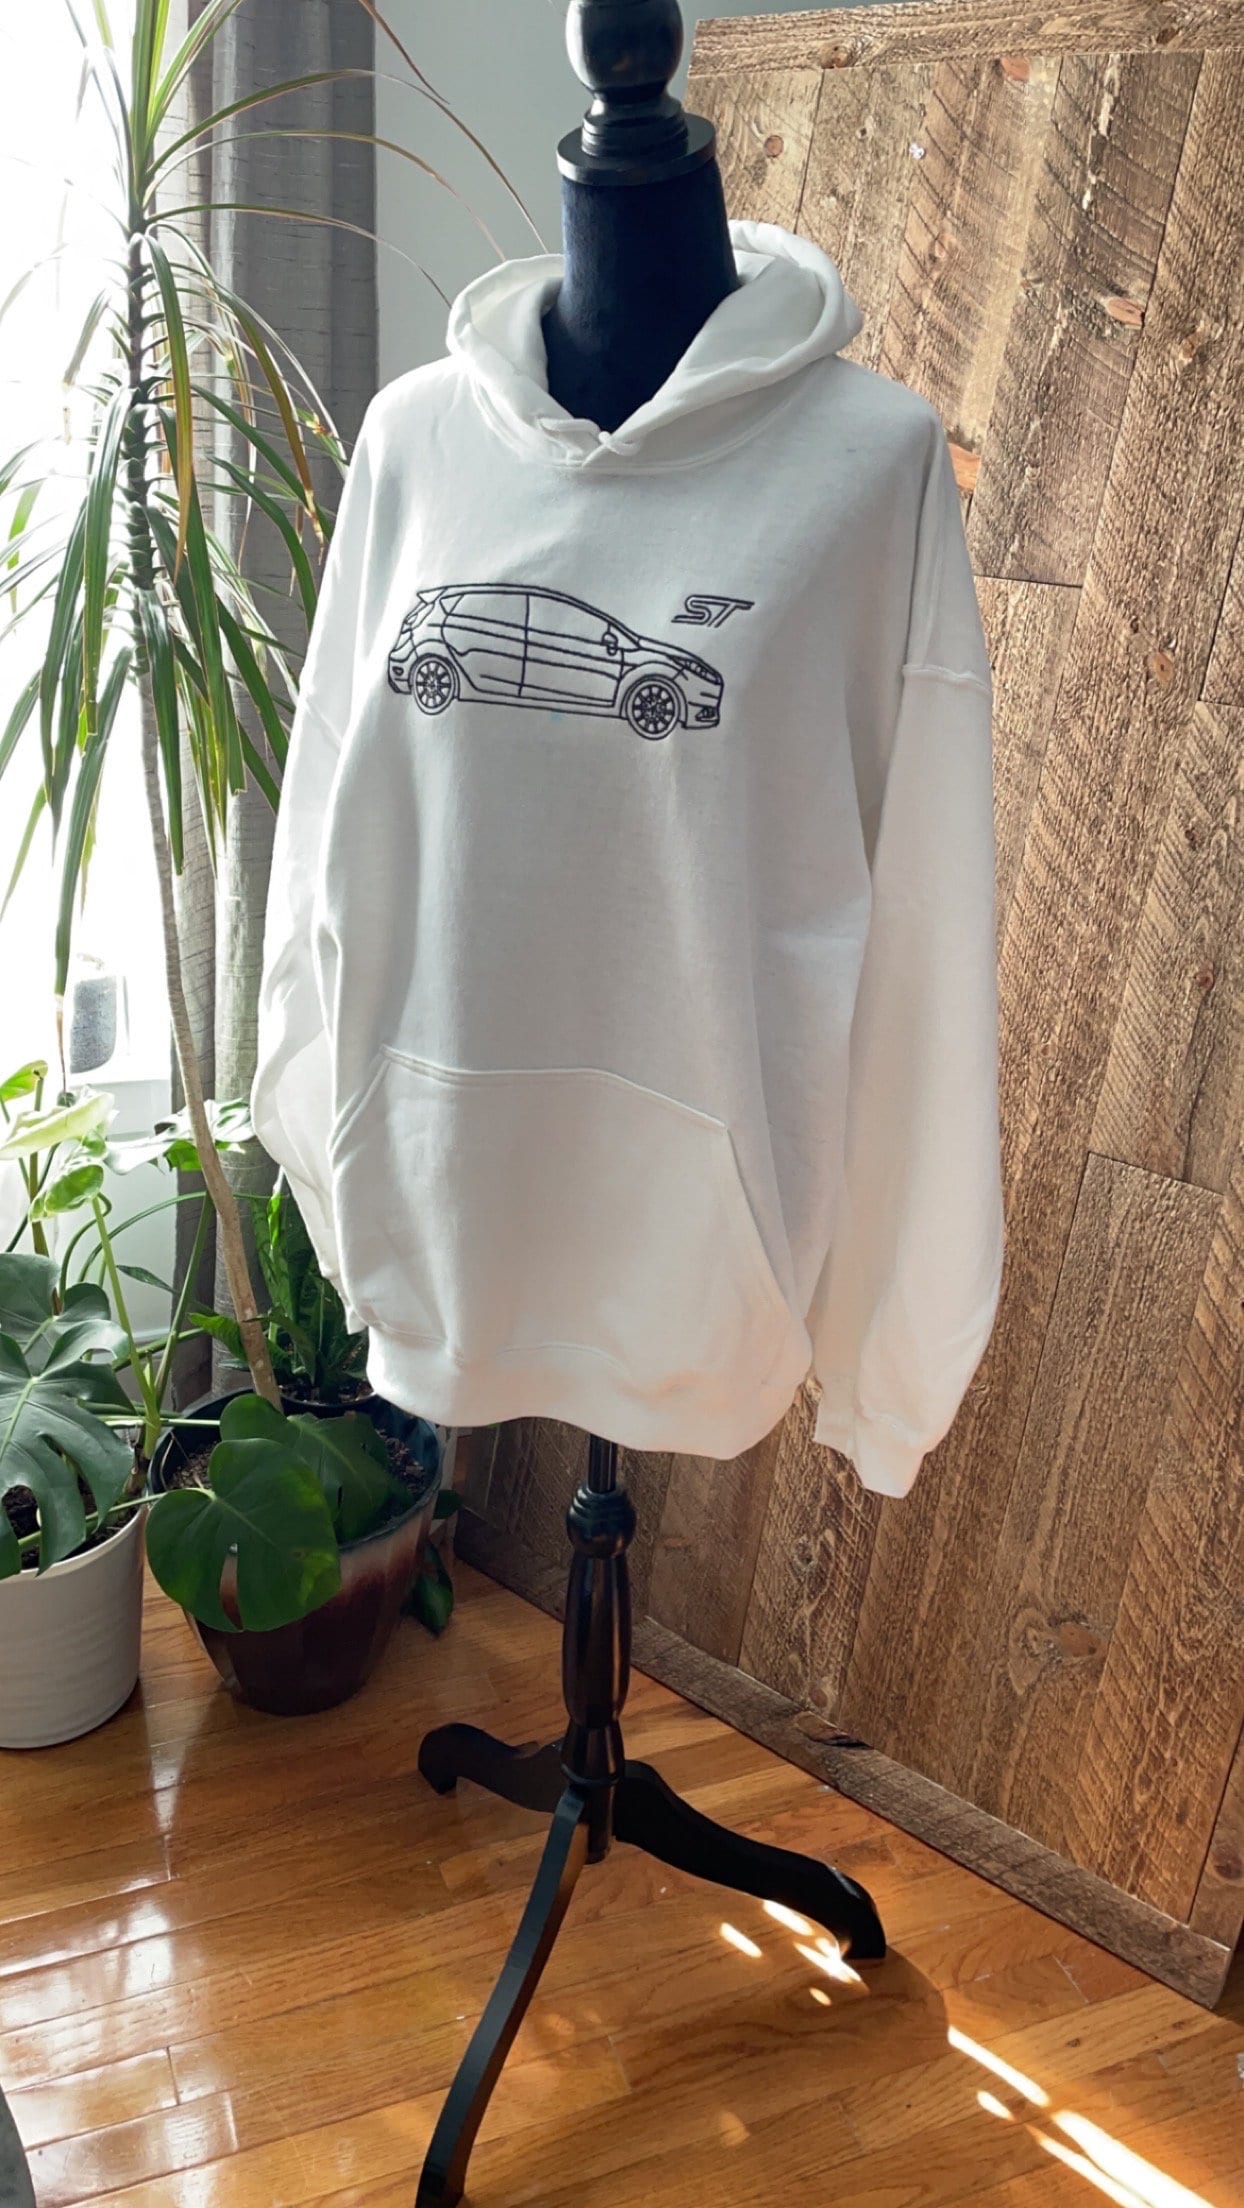 Ford Fiesta ST Embroidered Silhouette Unisex Hoodie, Car Hoodie, Gift Idea